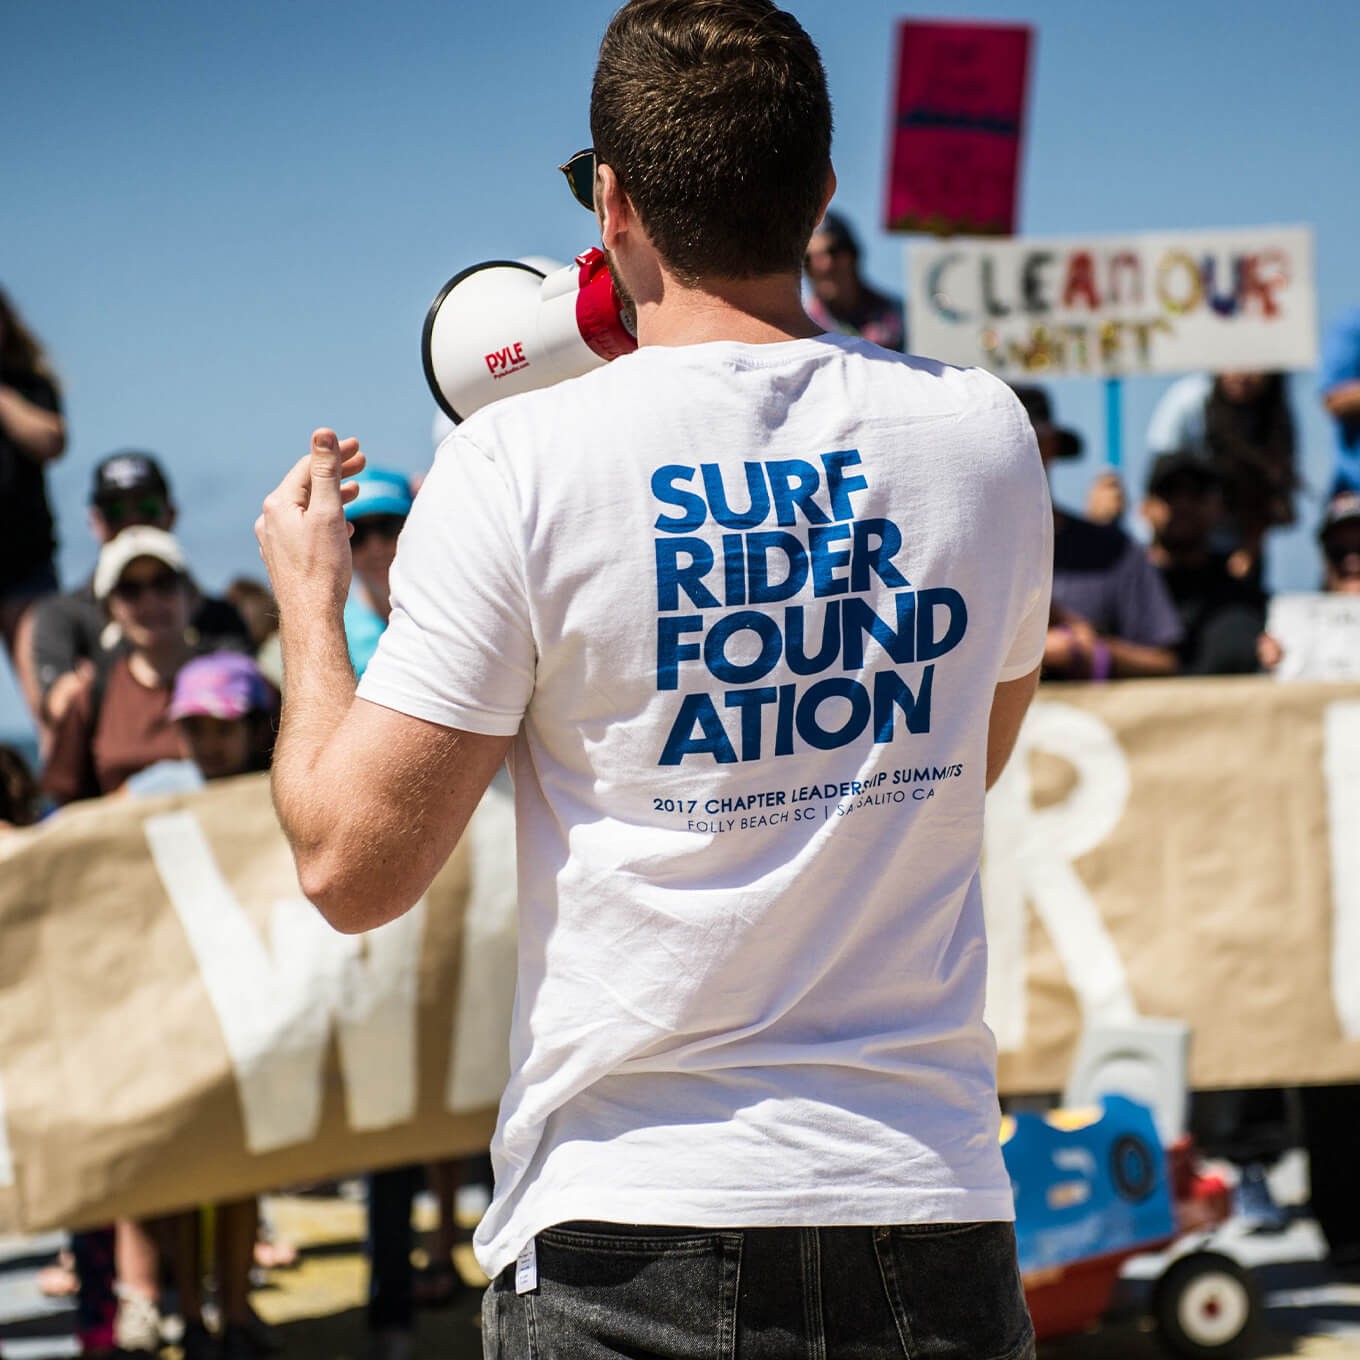 Man with megaphone wearing Surfrider shirt speaks to crowd of activists.